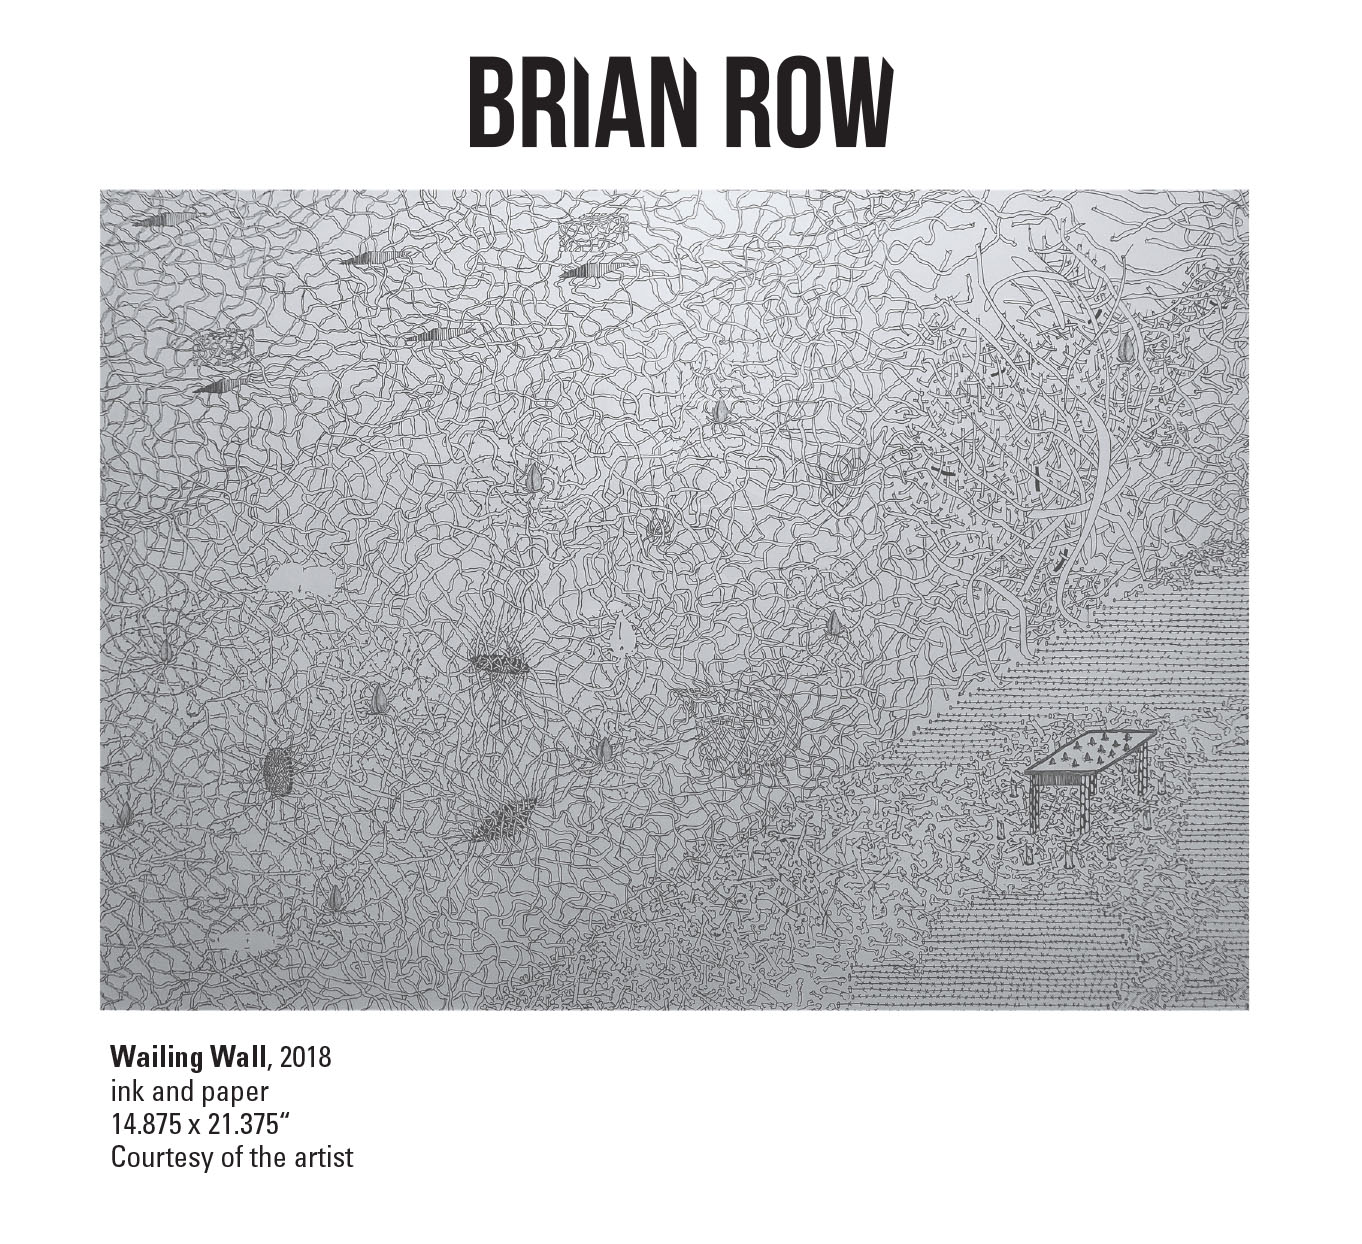 Brian Row, Wailing Wall, 2018. Ink and paper. 14.875 x 21.375“ Courtesy of the artist. A ink drawing that is black and white with various lines creating a texture